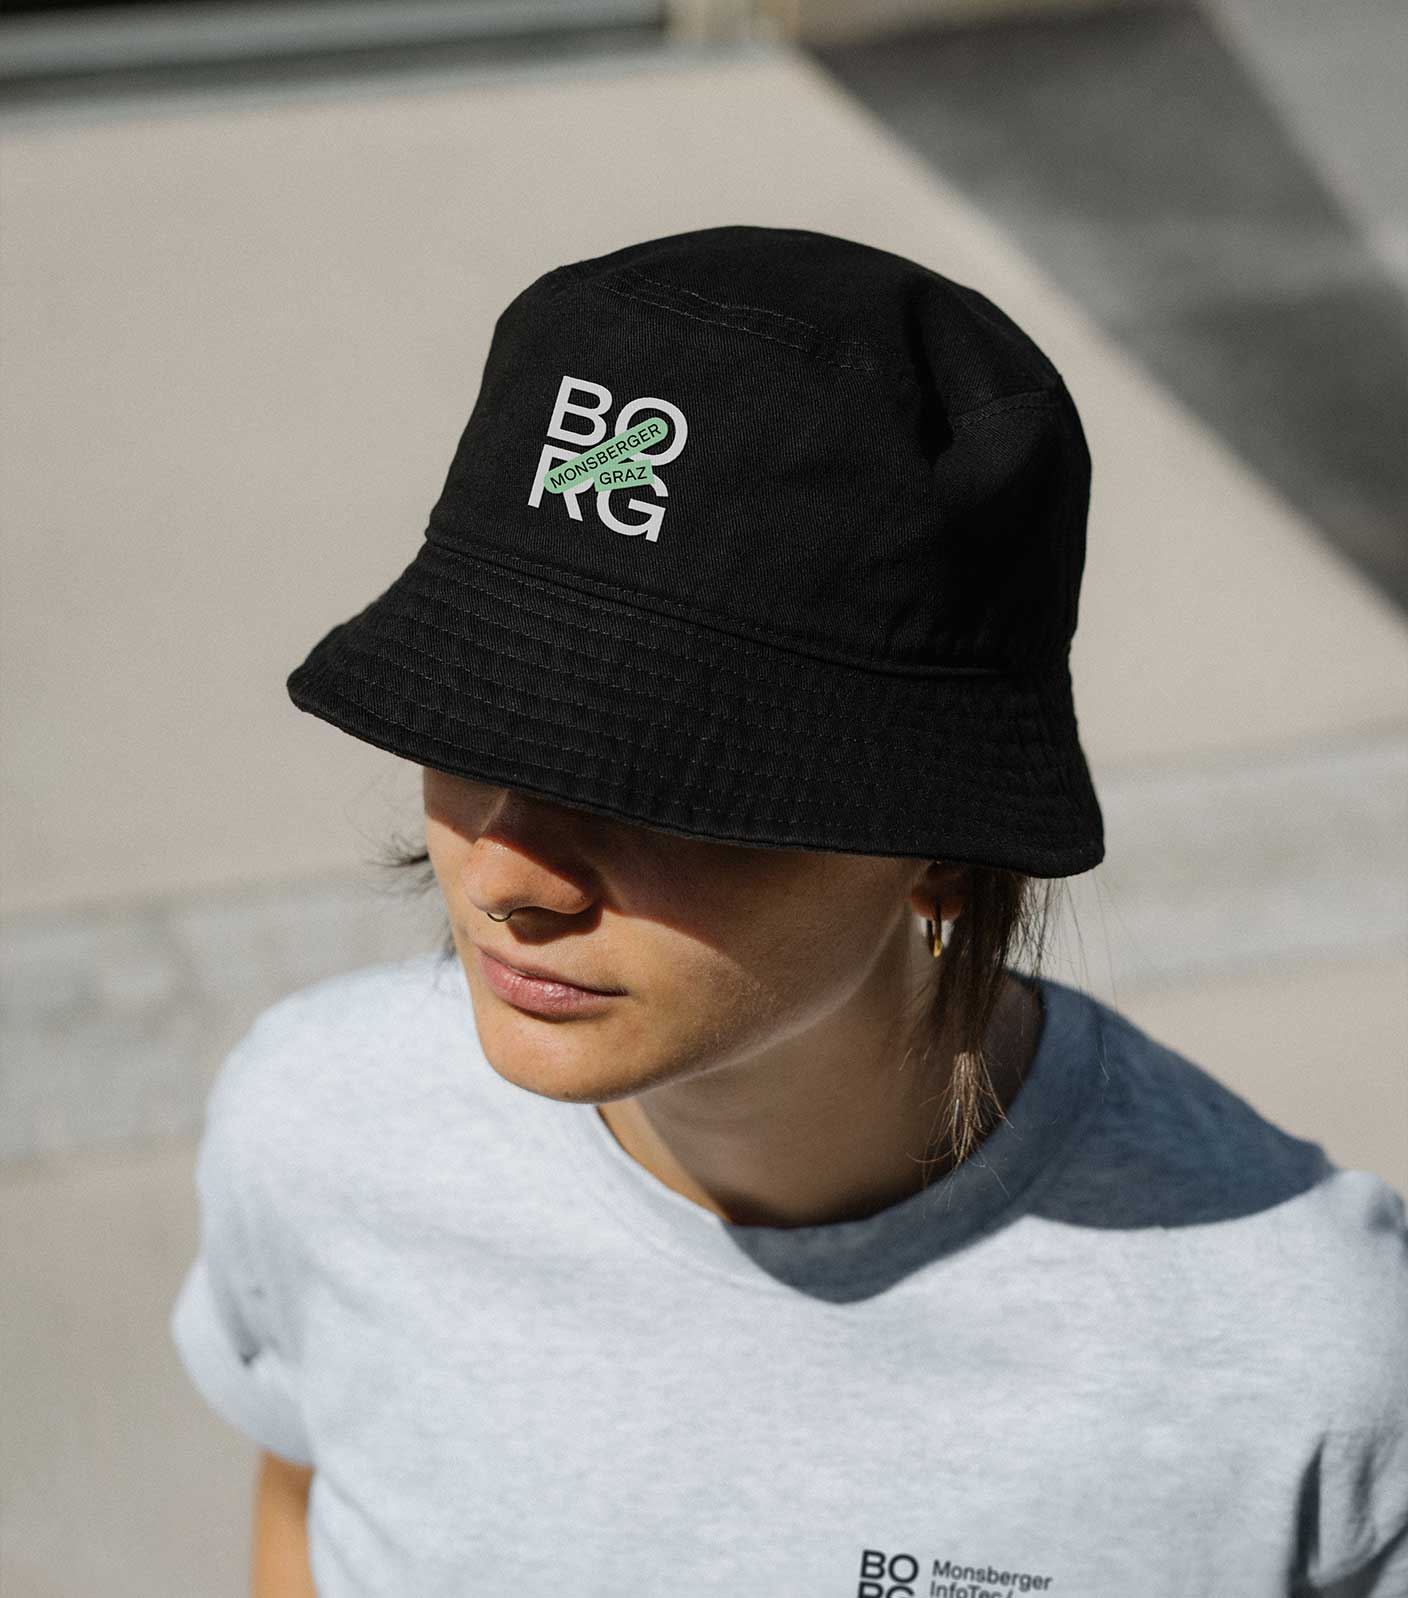 A female student wearing a black bucket hat with the BORG Monsberger logo and a grey t-shirt with the logo in bright sunlight shot from slightly above.